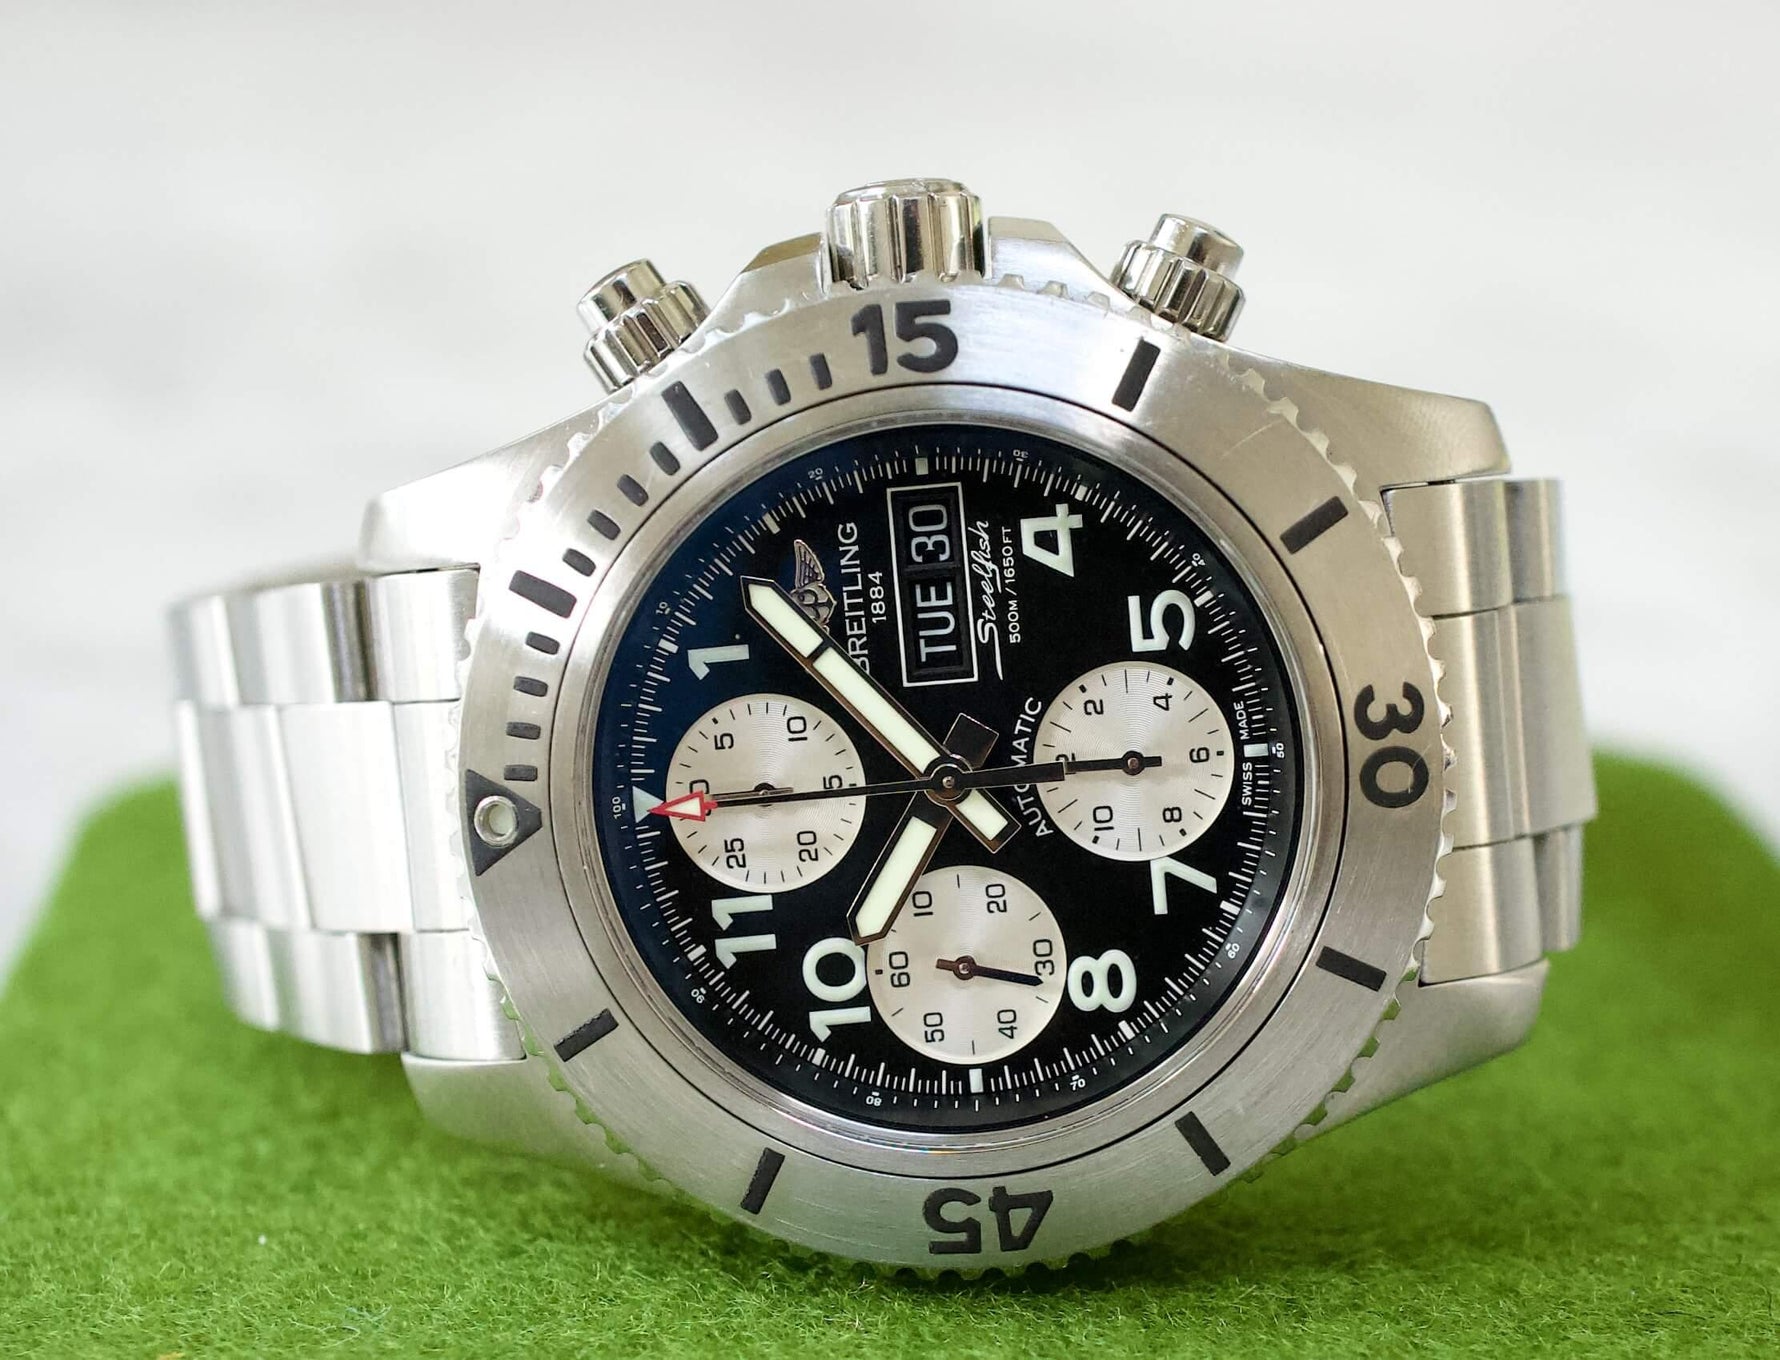 SOLD OUT: Breitling SuperOcean Steelfish Chronograph II 44MM Box and Manuals A13341 - WearingTime Luxury Watches